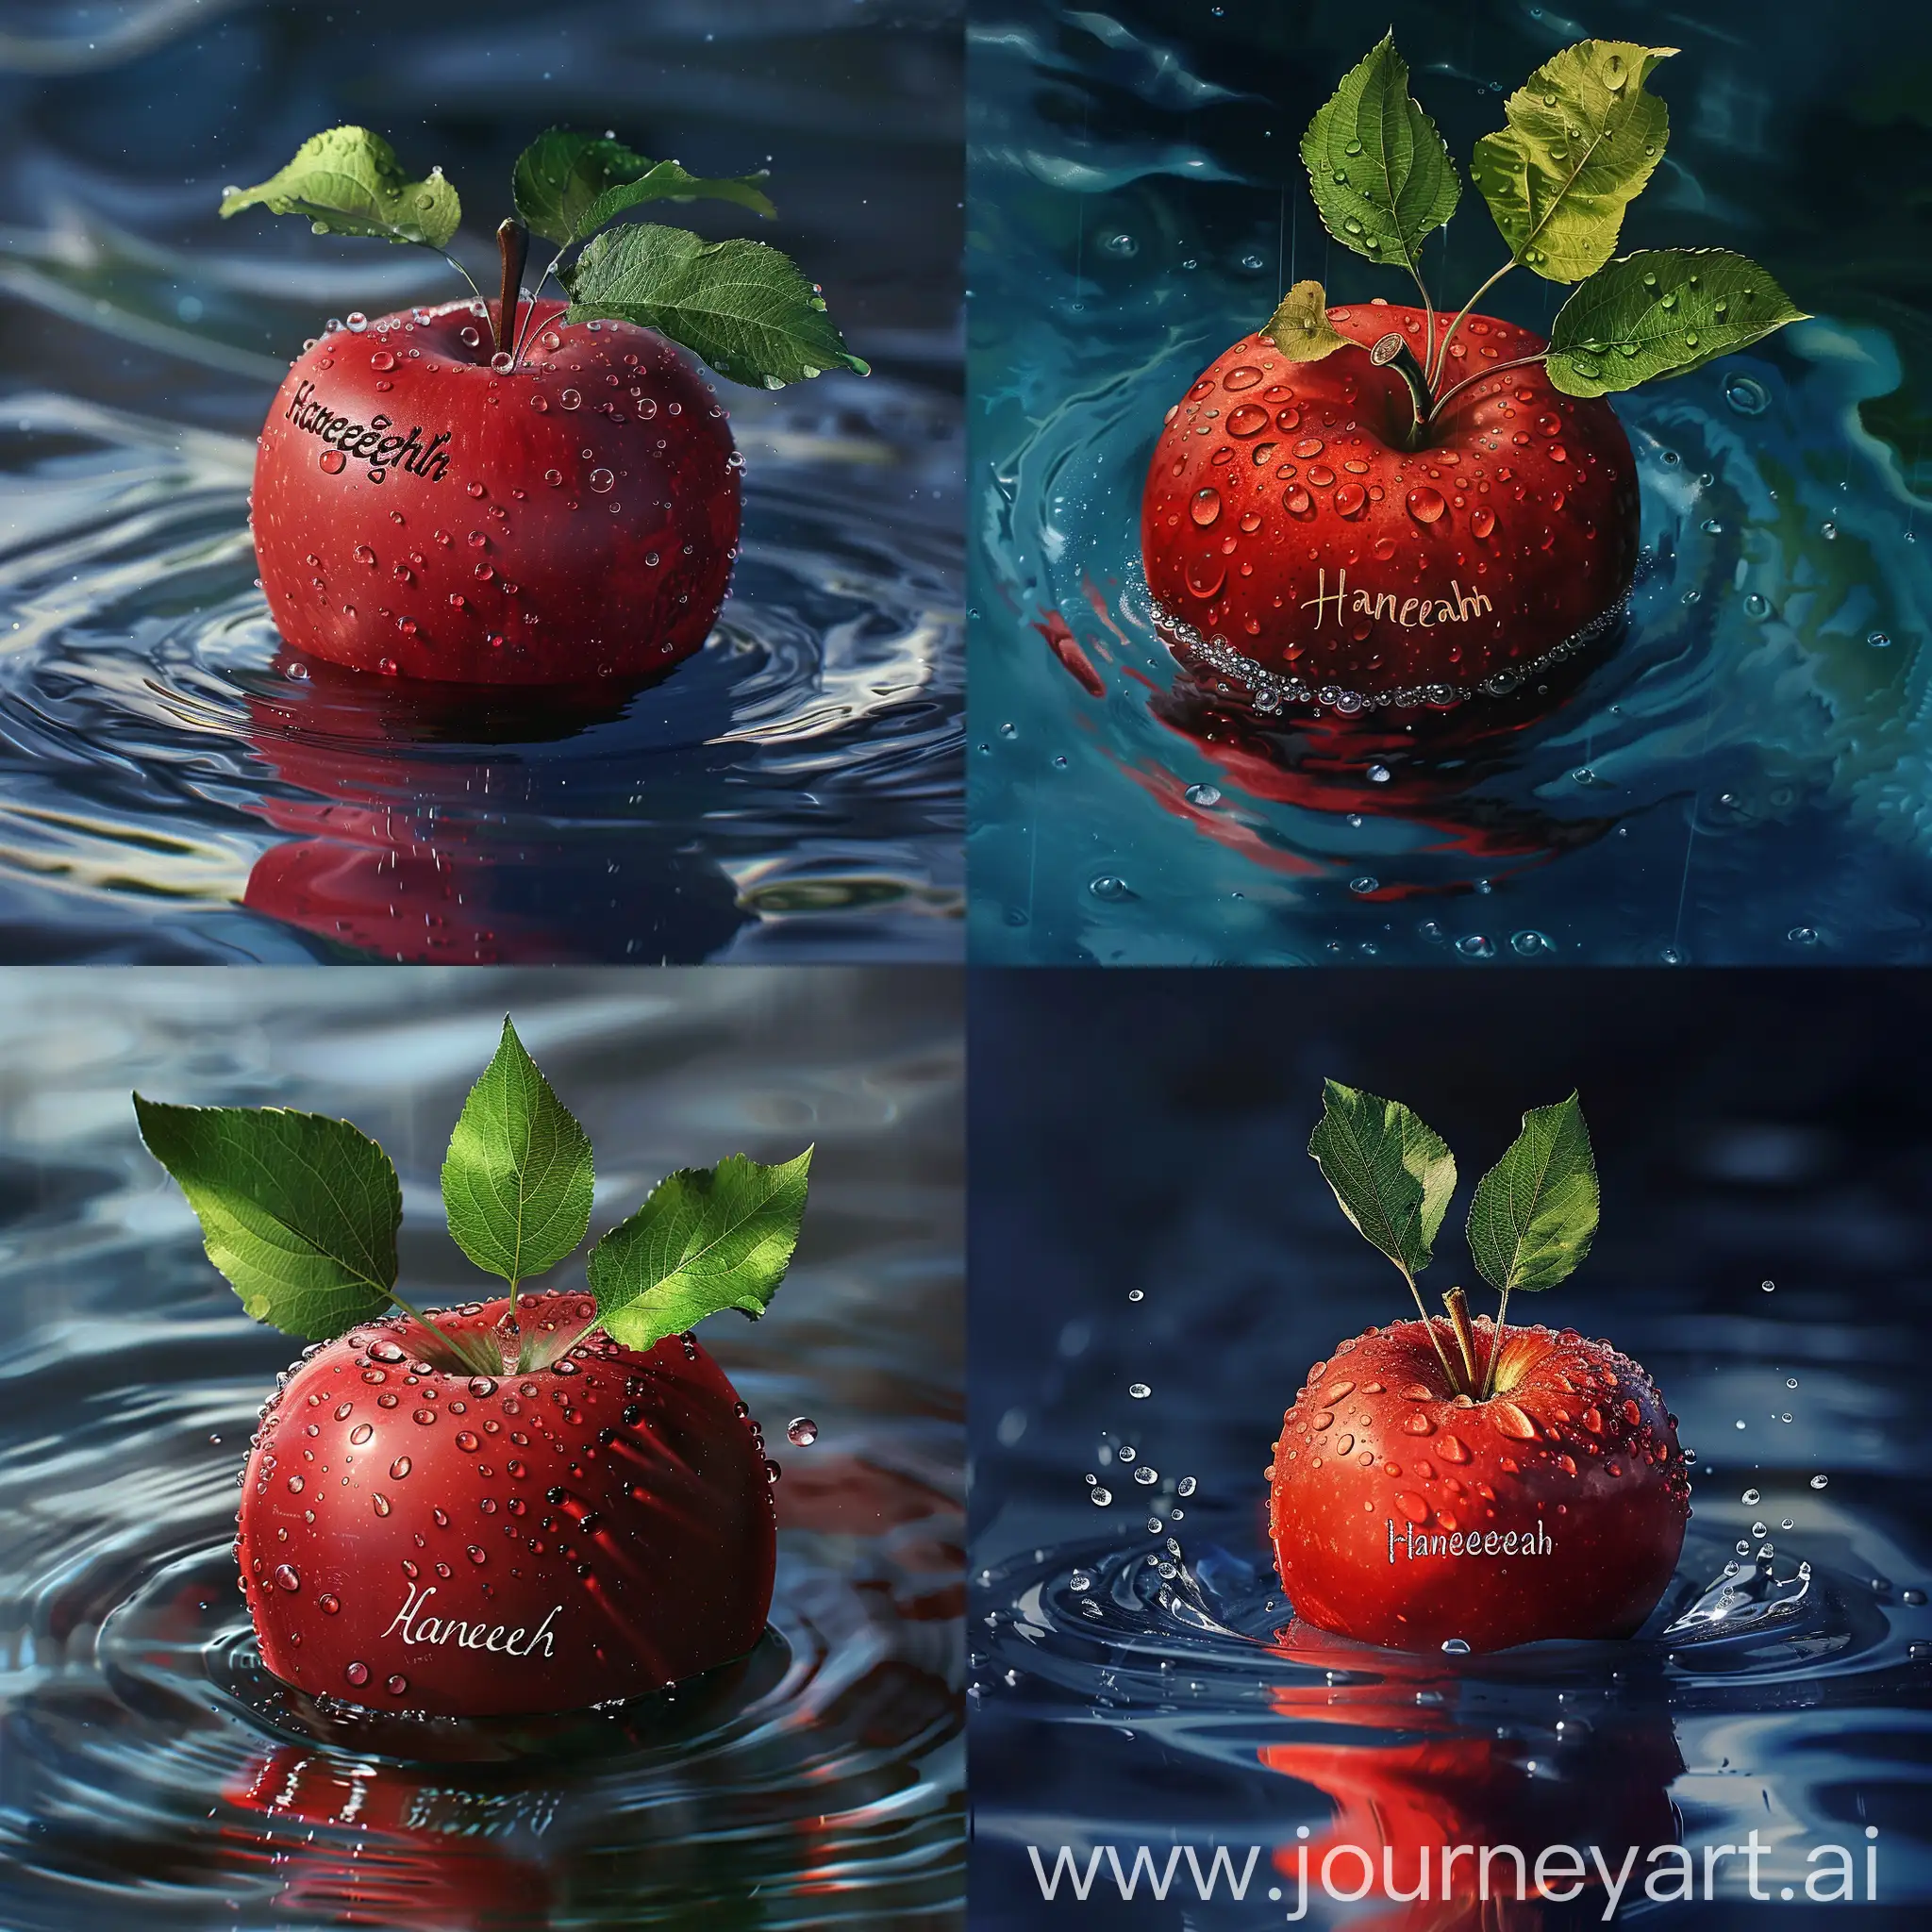 A red apple with three leaf floating on top, with drops on the apple and ripples around it. Engraved on the apple is “Haneefah.” Extremely realistic, cinematic images.